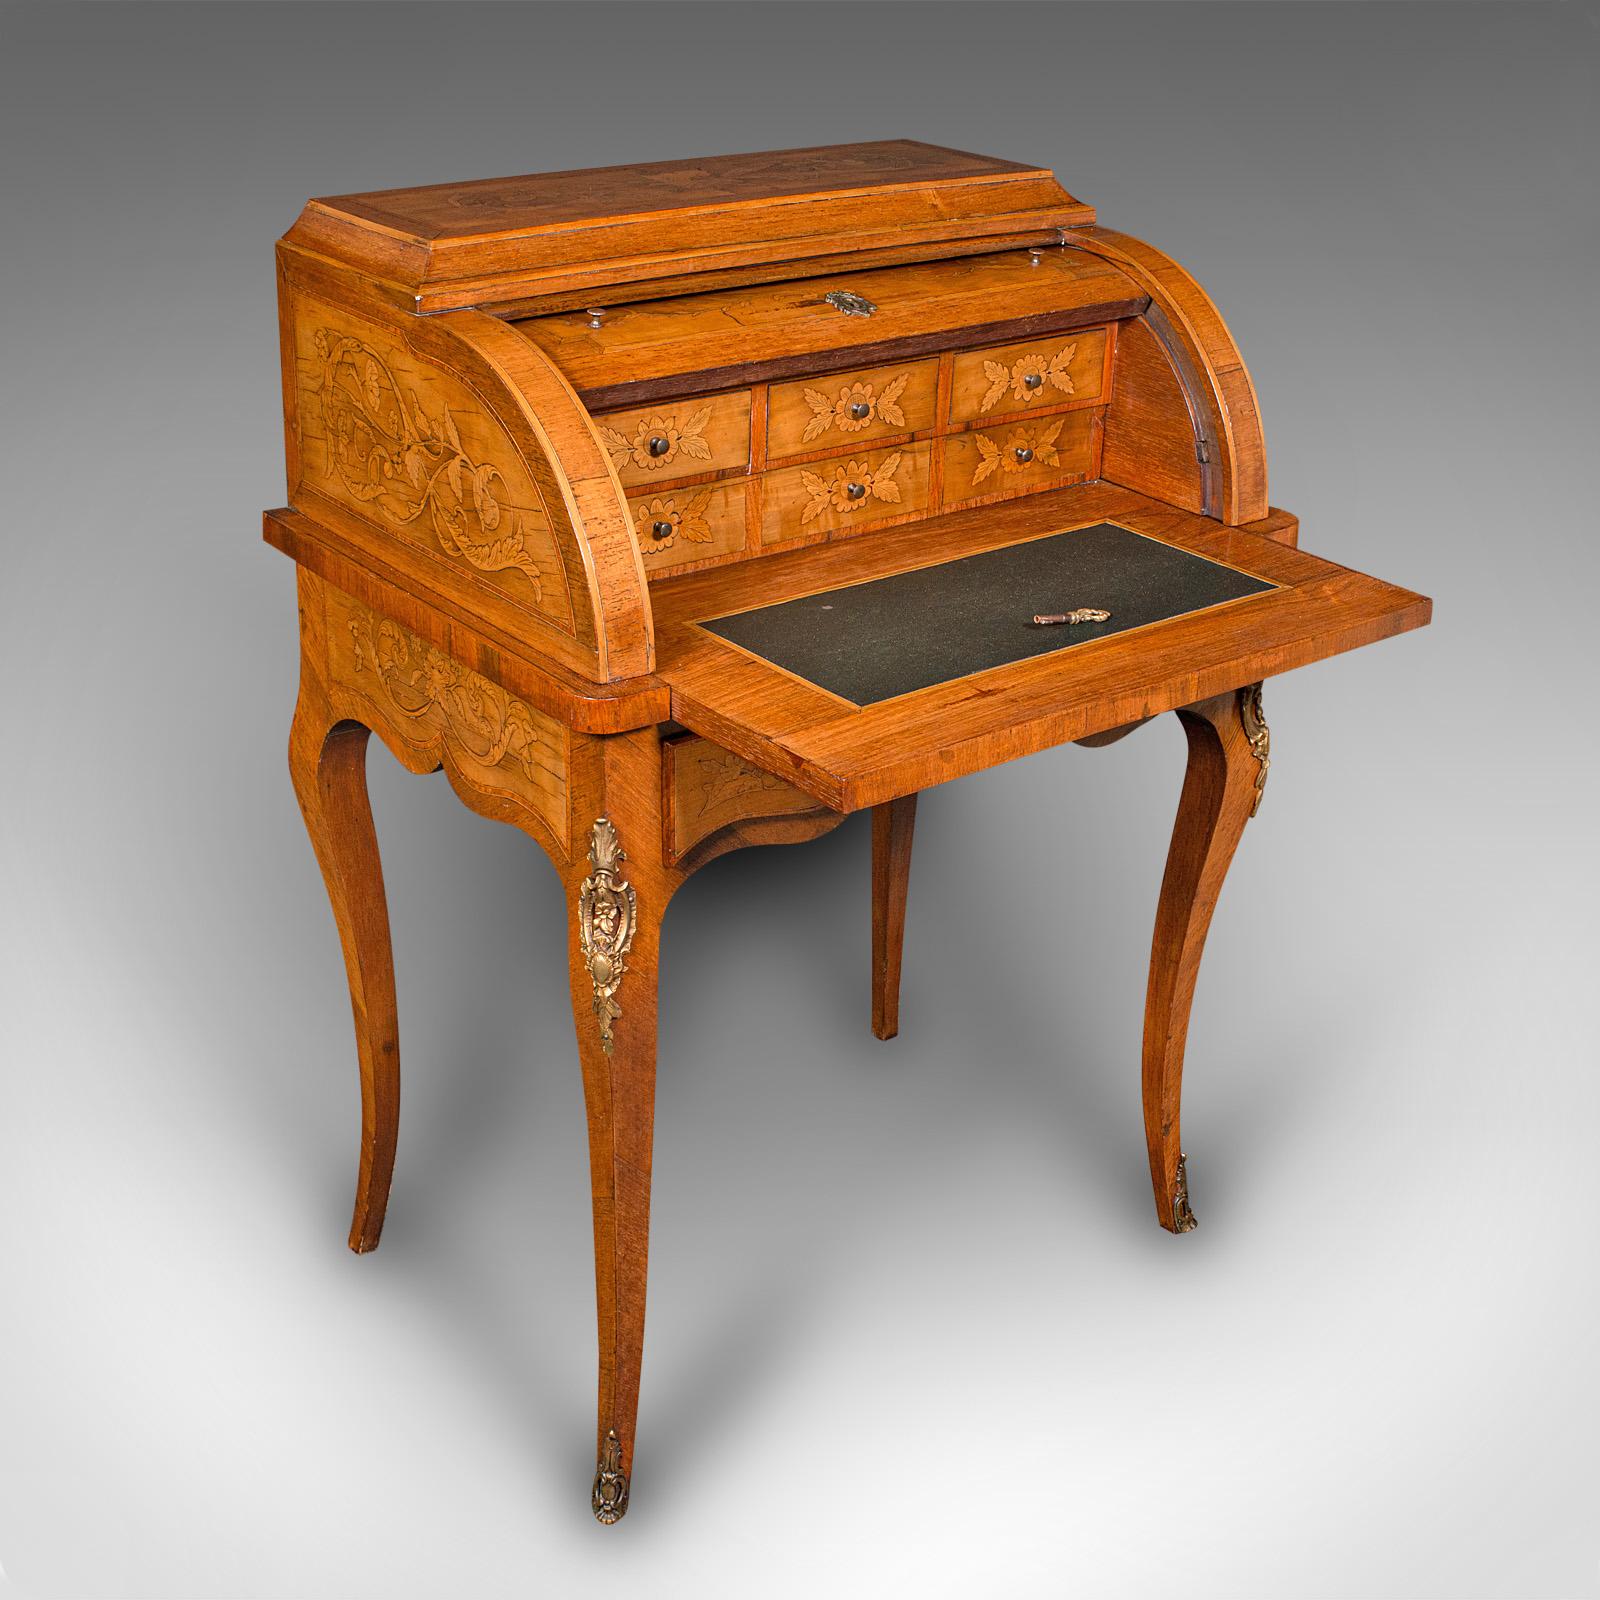 This is an antique ladies writing desk. A French, walnut decorative bonheur du jour, dating to the late Victorian period, circa 1900.

Beautiful craftsmanship with superb colour and form
Displaying a desirable aged patina and in very good